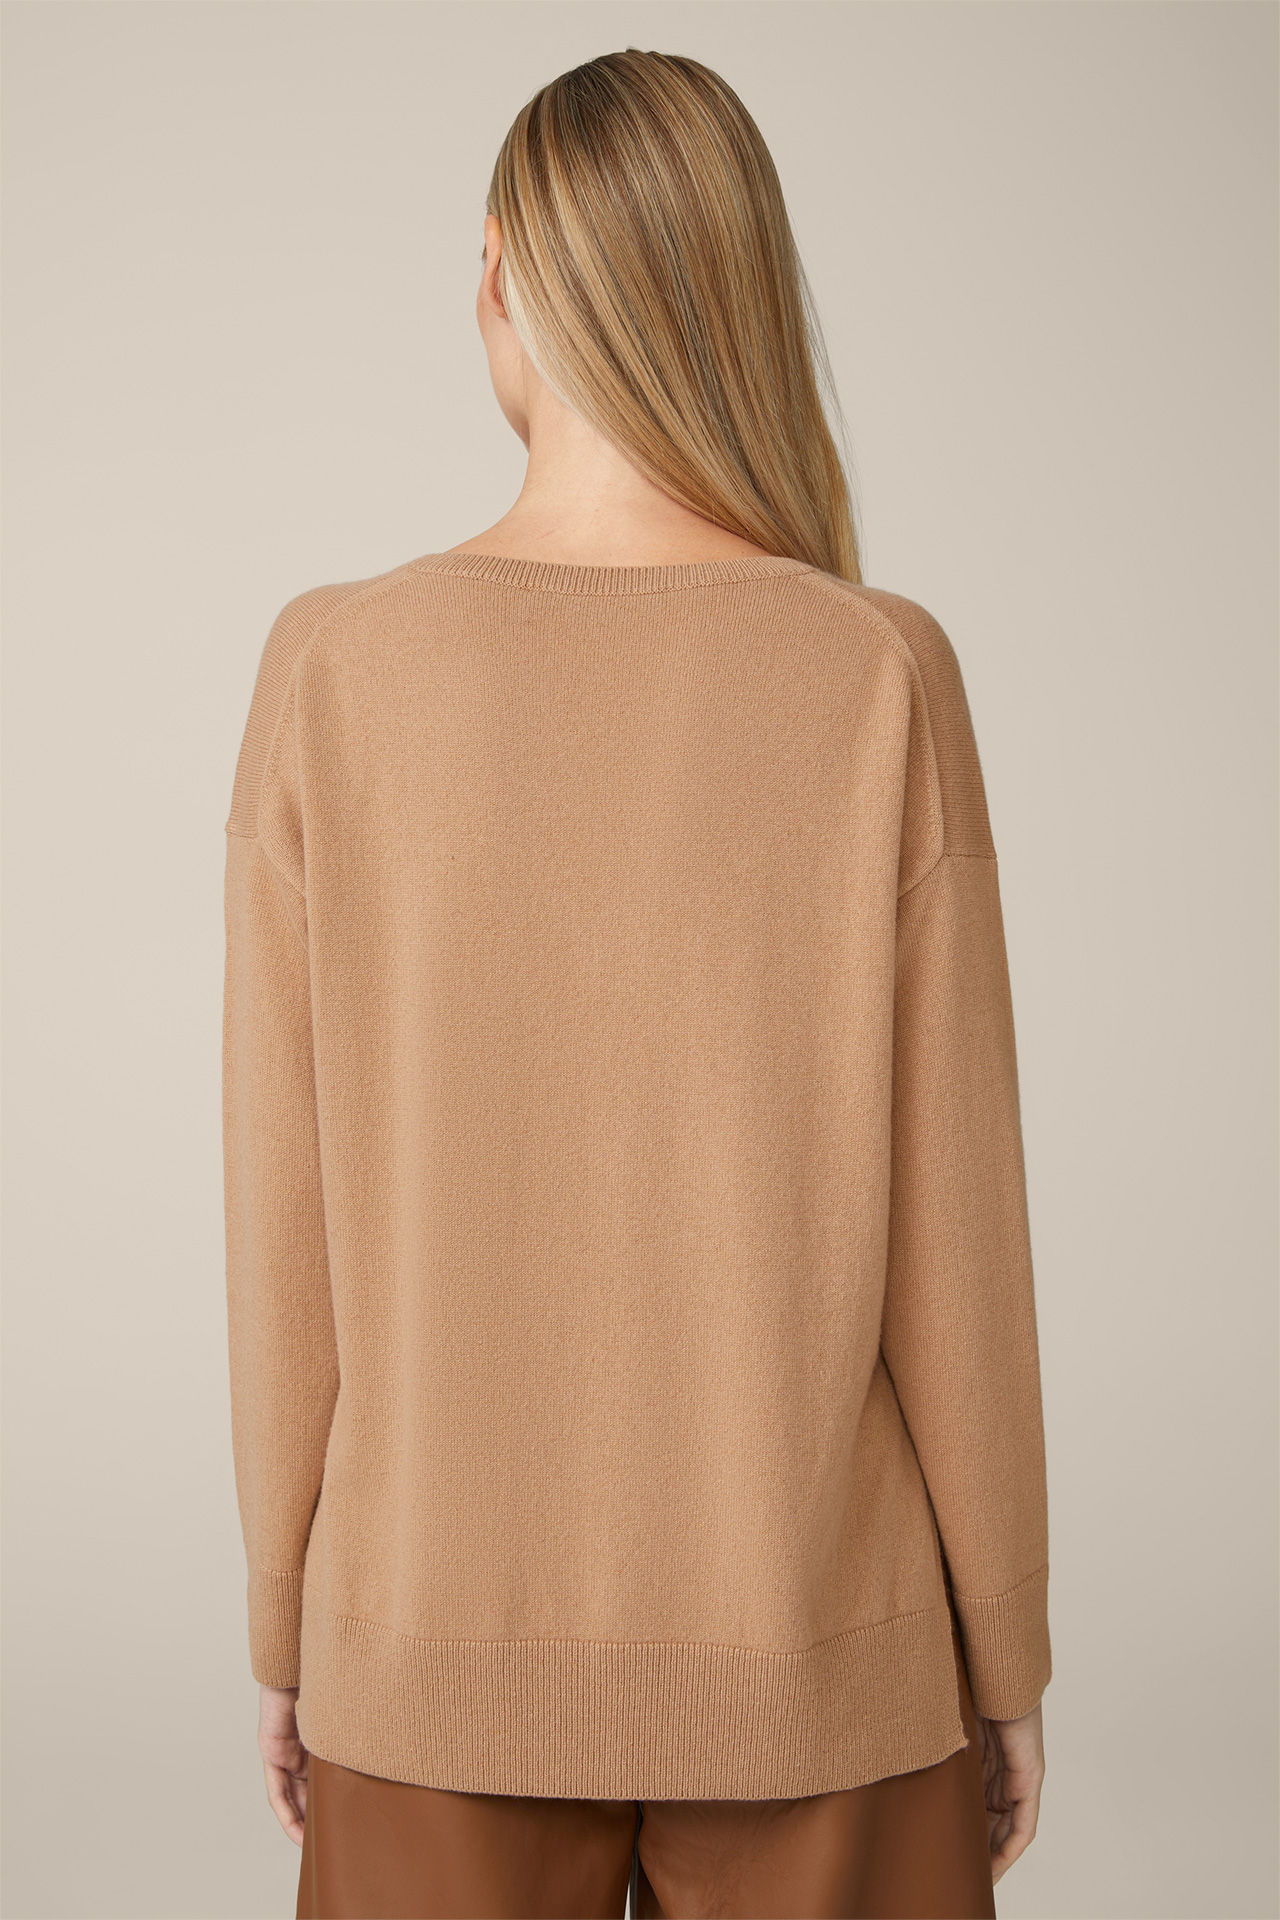 Cashmere Sweater in Camel